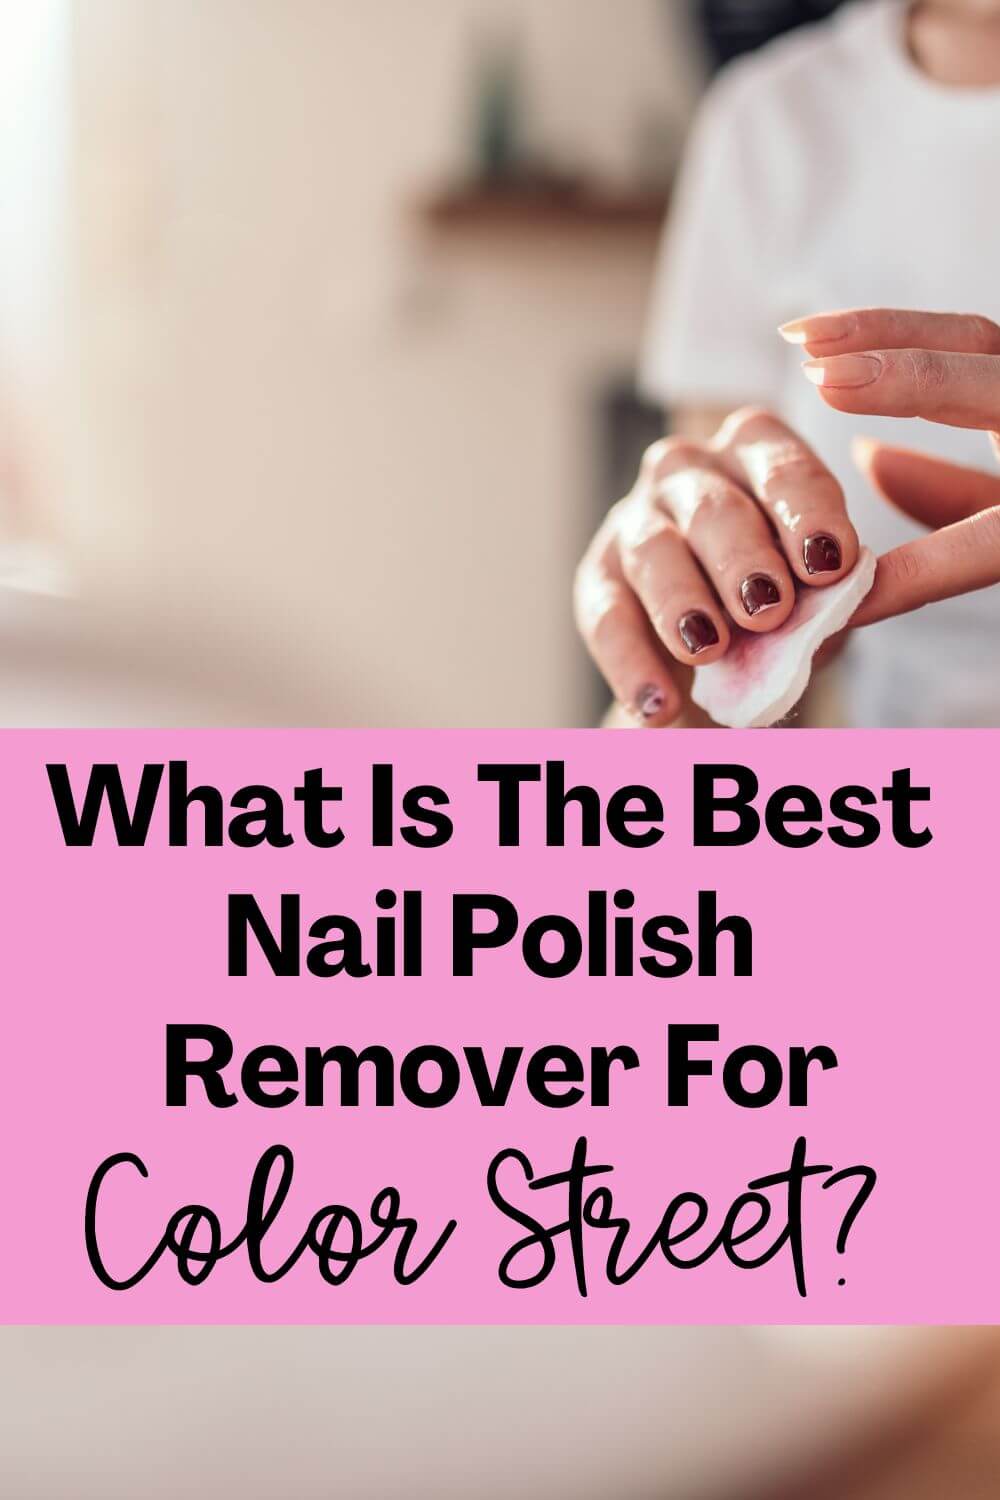 Best Nail Polish Removers For Color Street